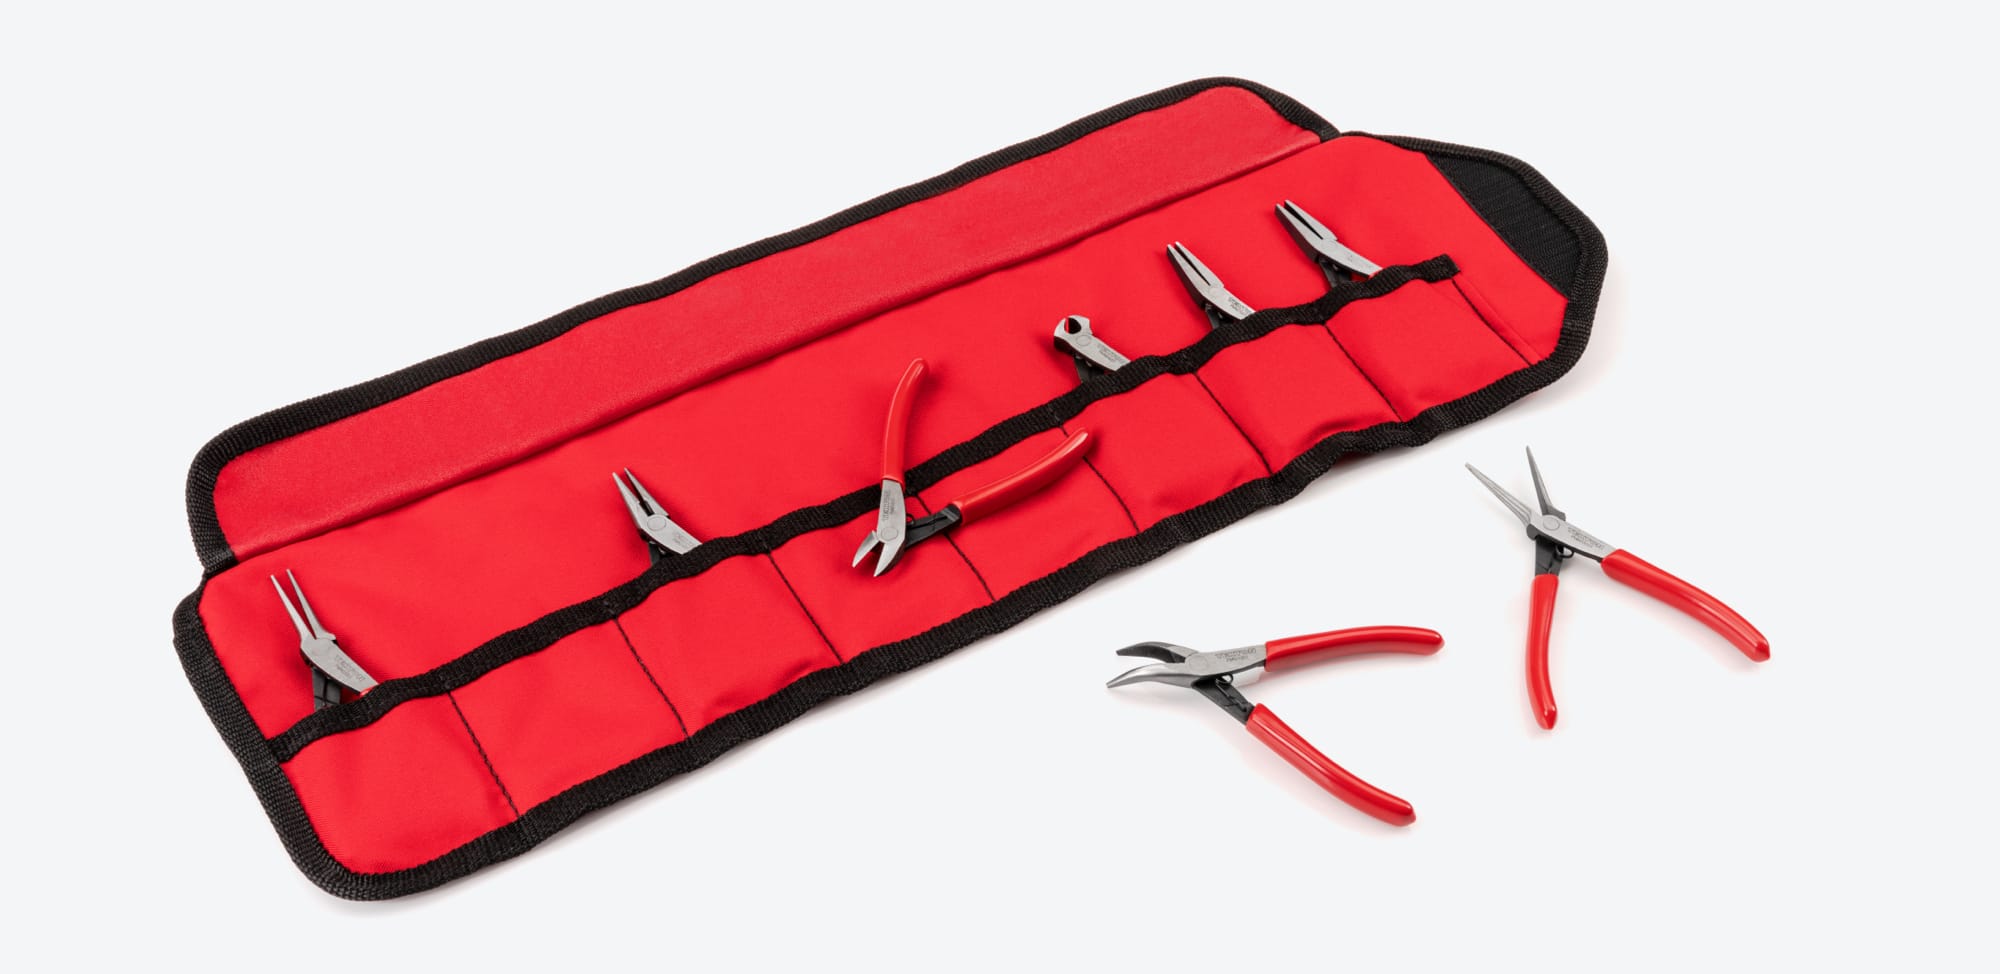 TEKTON 8-Piece Mini Pliers set with pouch unrolled